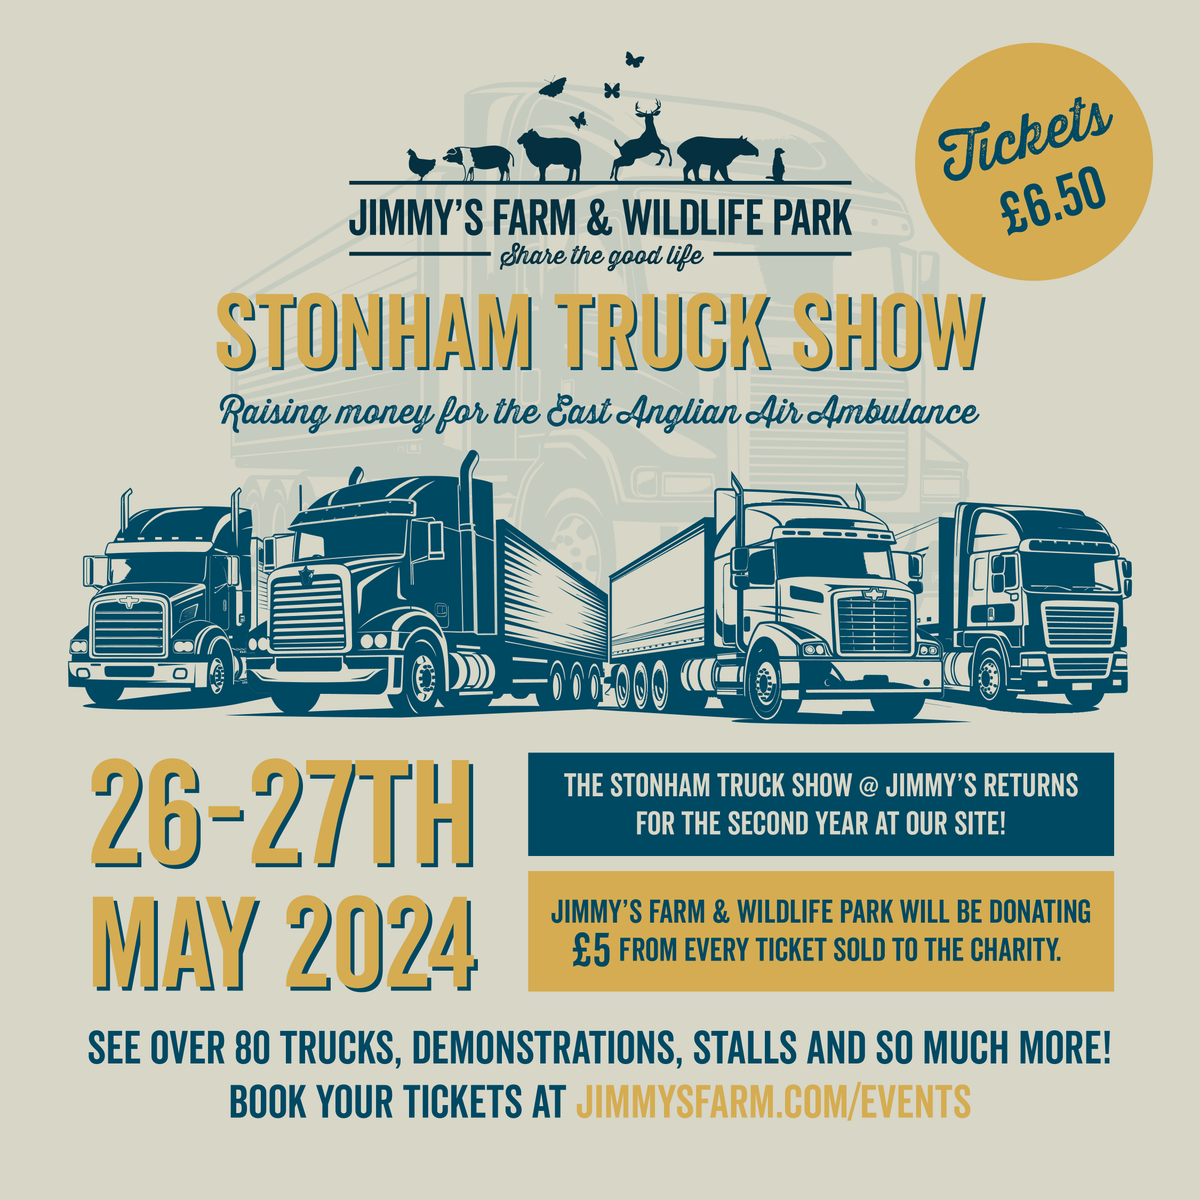 NEXT WEEK! 💥 Stonham Truck Show is BACK on the 26th-27th May! Enjoy over 200 trucks, food stalls, bouncy castle, show ring events such as dog agility and so much more! Get your tickets here - jimmysfarm.com/event/stonham-…